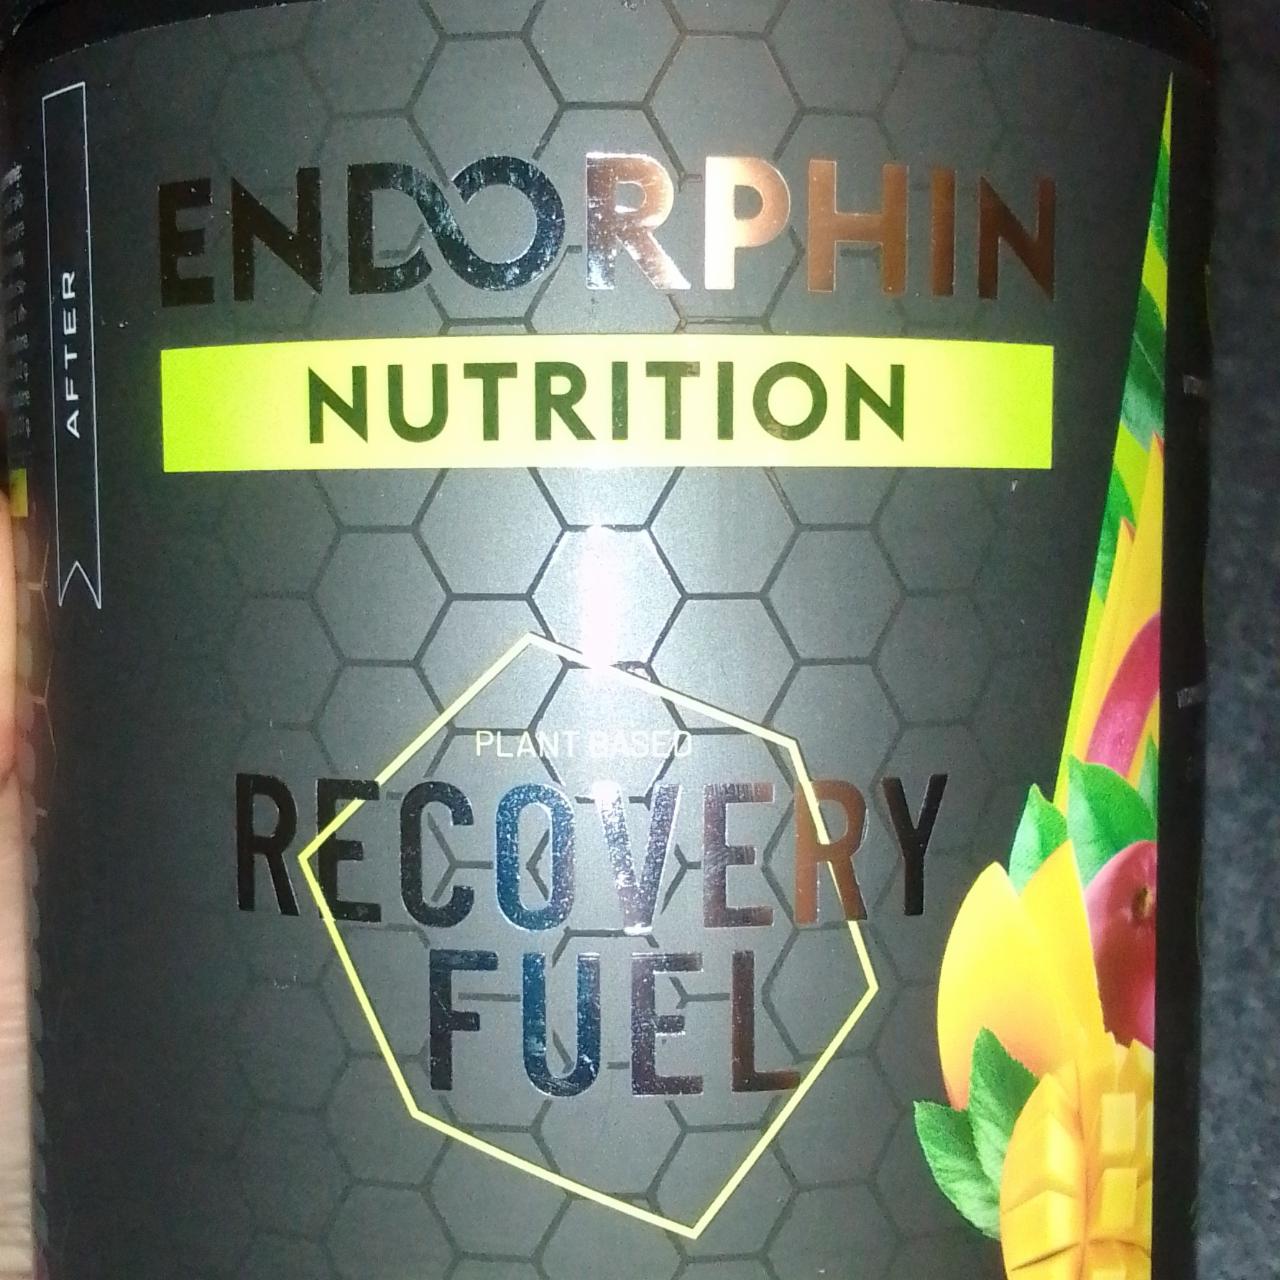 Fotografie - Recovery Fuel Endorphin Nutrition